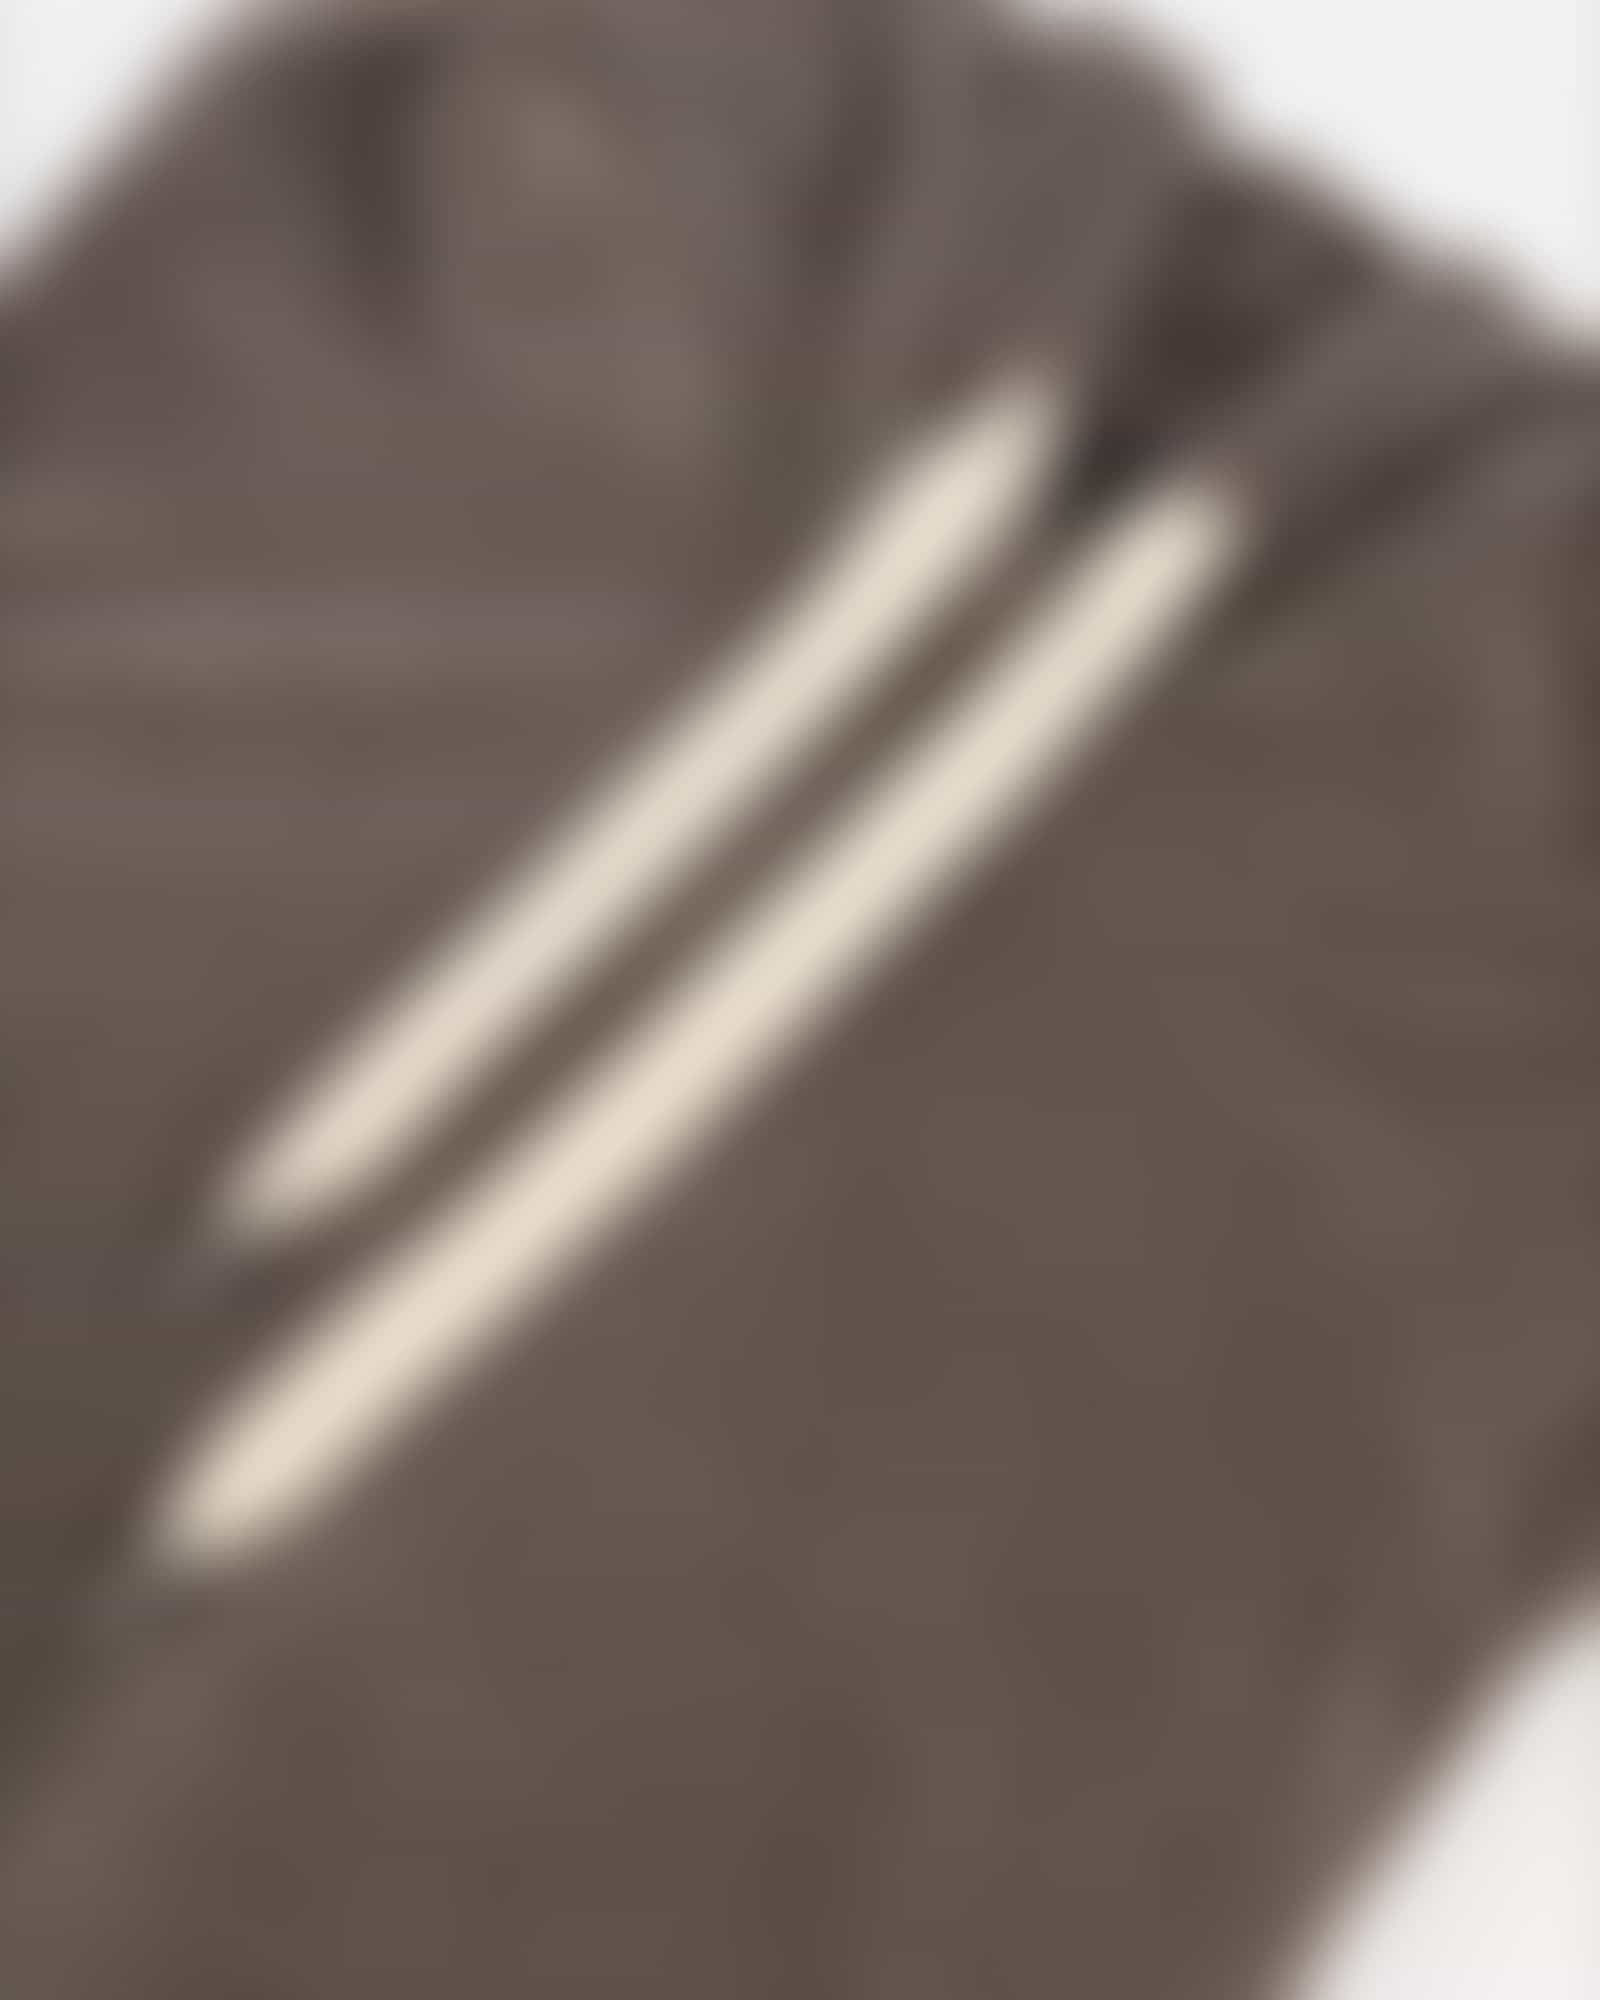 Cawö Home Active Longsize Hoodie 820 - Farbe: mocca-natur - 33